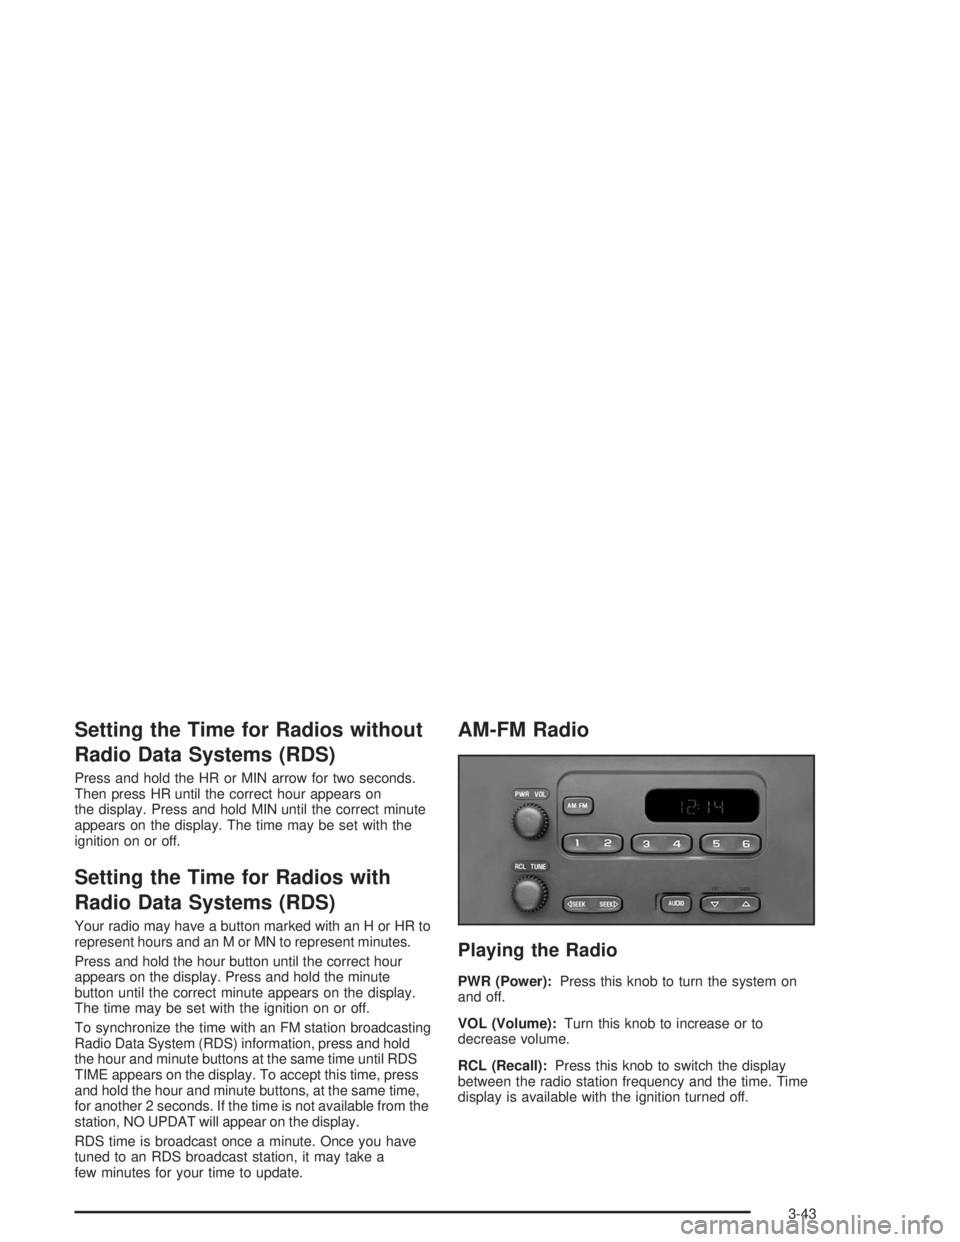 GMC SAVANA 2004  Owners Manual Setting the Time for Radios without
Radio Data Systems (RDS)
Press and hold the HR or MIN arrow for two seconds.
Then press HR until the correct hour appears on
the display. Press and hold MIN until t